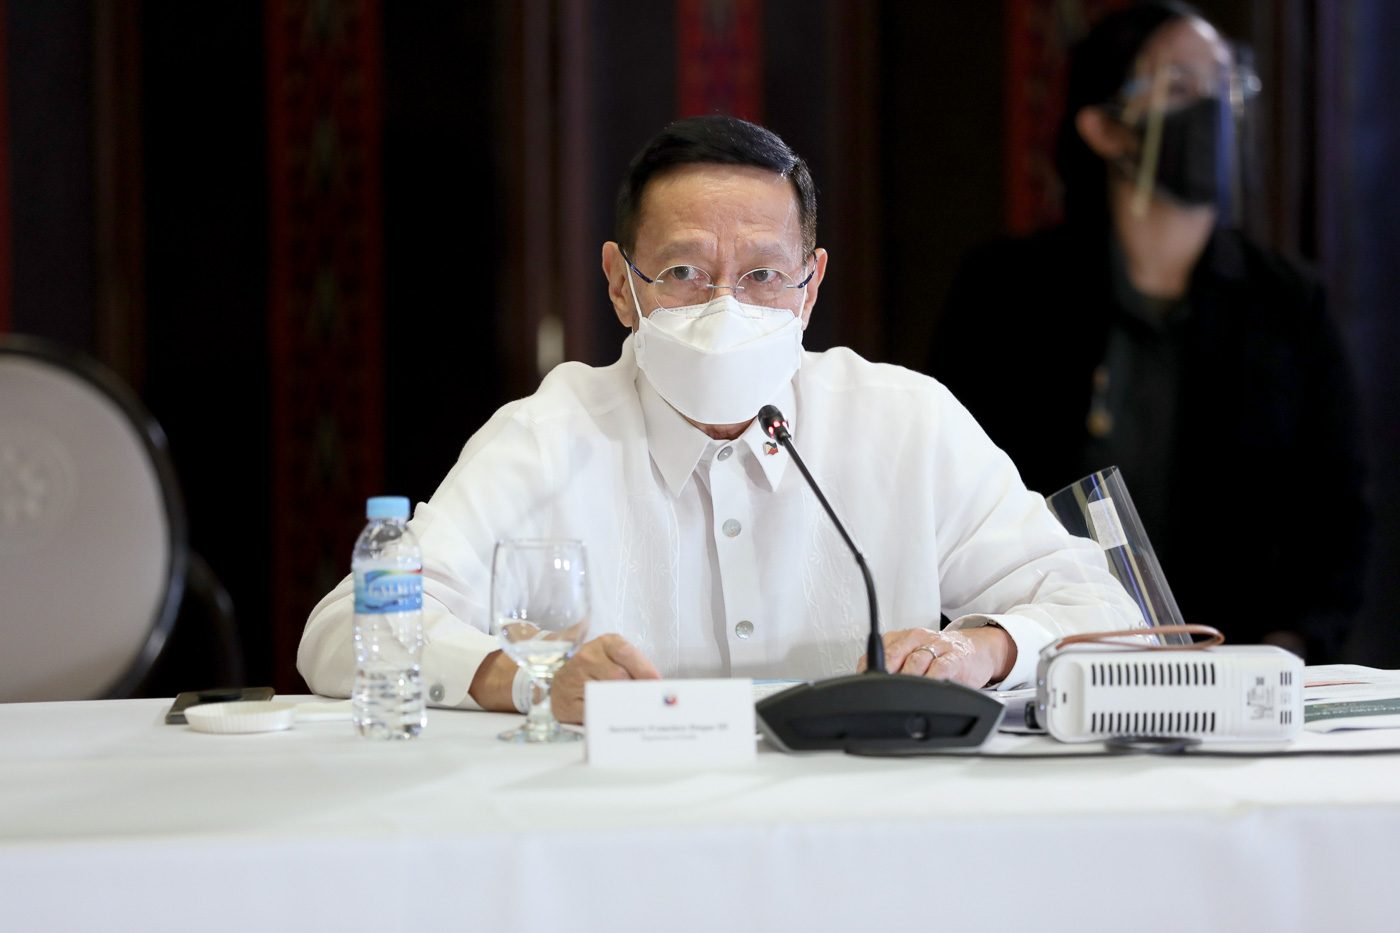 Duque not consulted on scrapping quarantine for fully vaccinated travelers